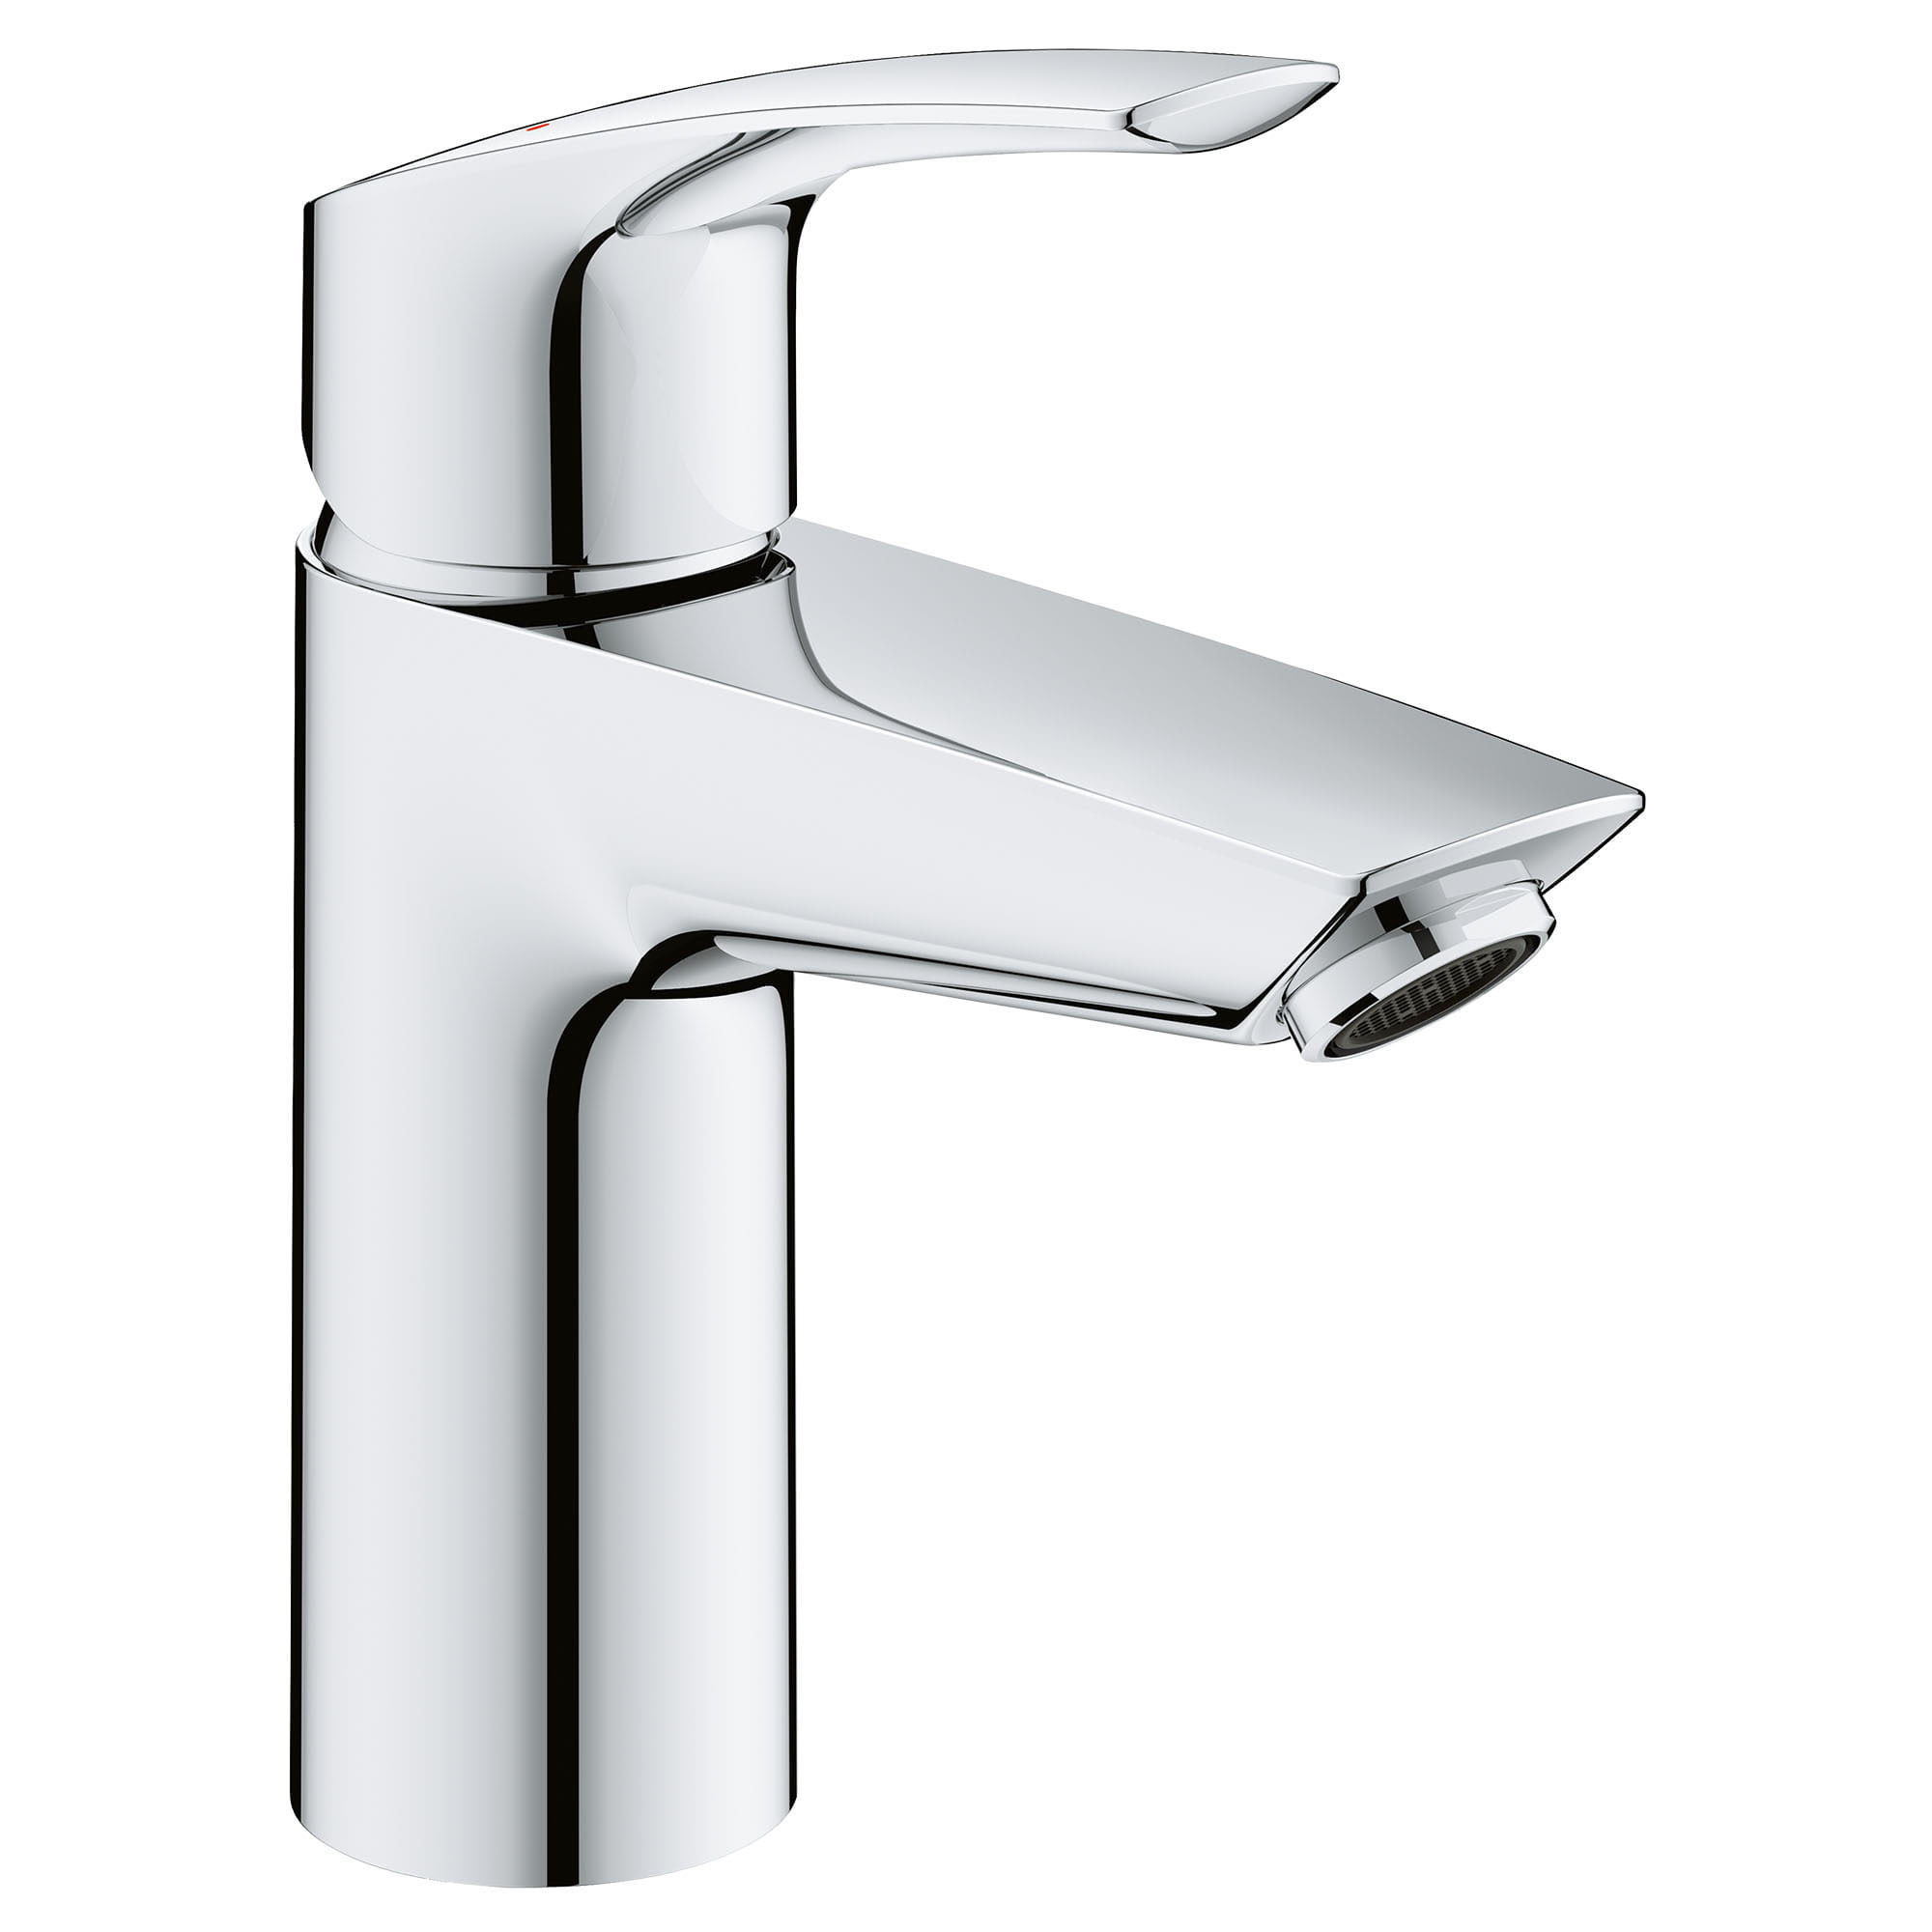 Eurosmart 1-Hole S-Size Lav Faucet in Chrome, No Drn 1.2 gpm